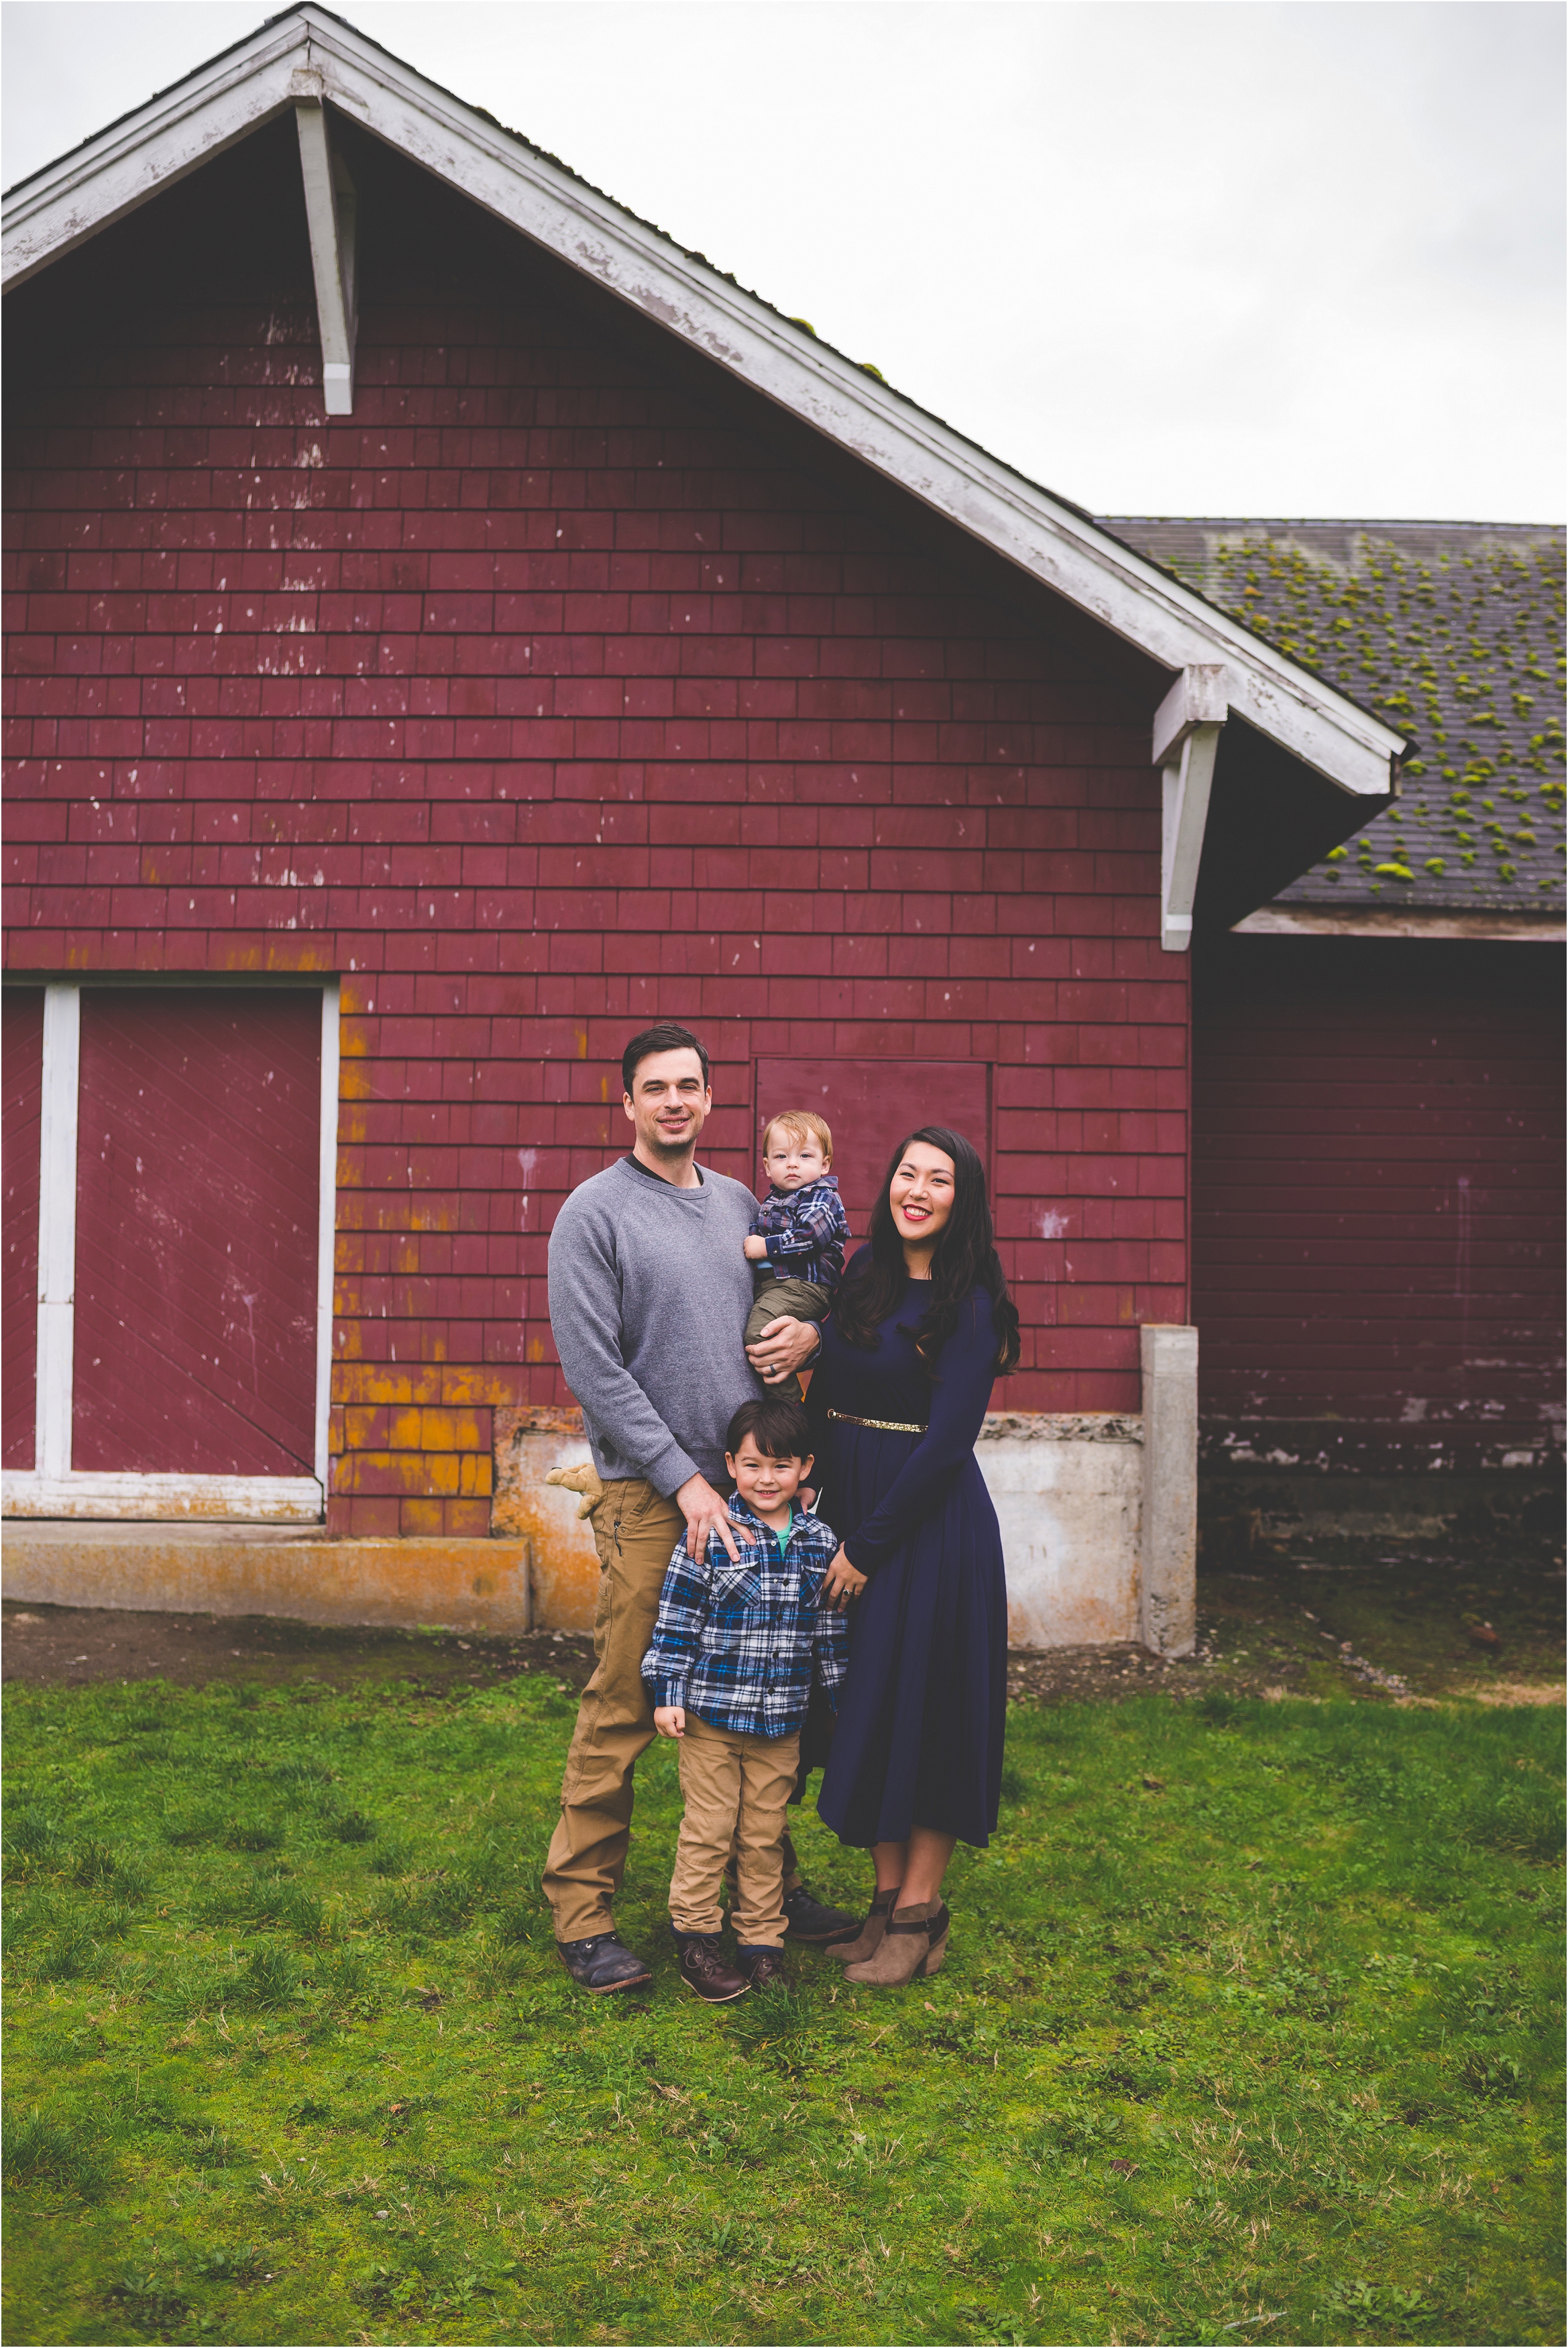 fort-steilacoom-park-family-session-jannicka-mayte-pacific-northwest-lifestyle-photographer_0003.jpg